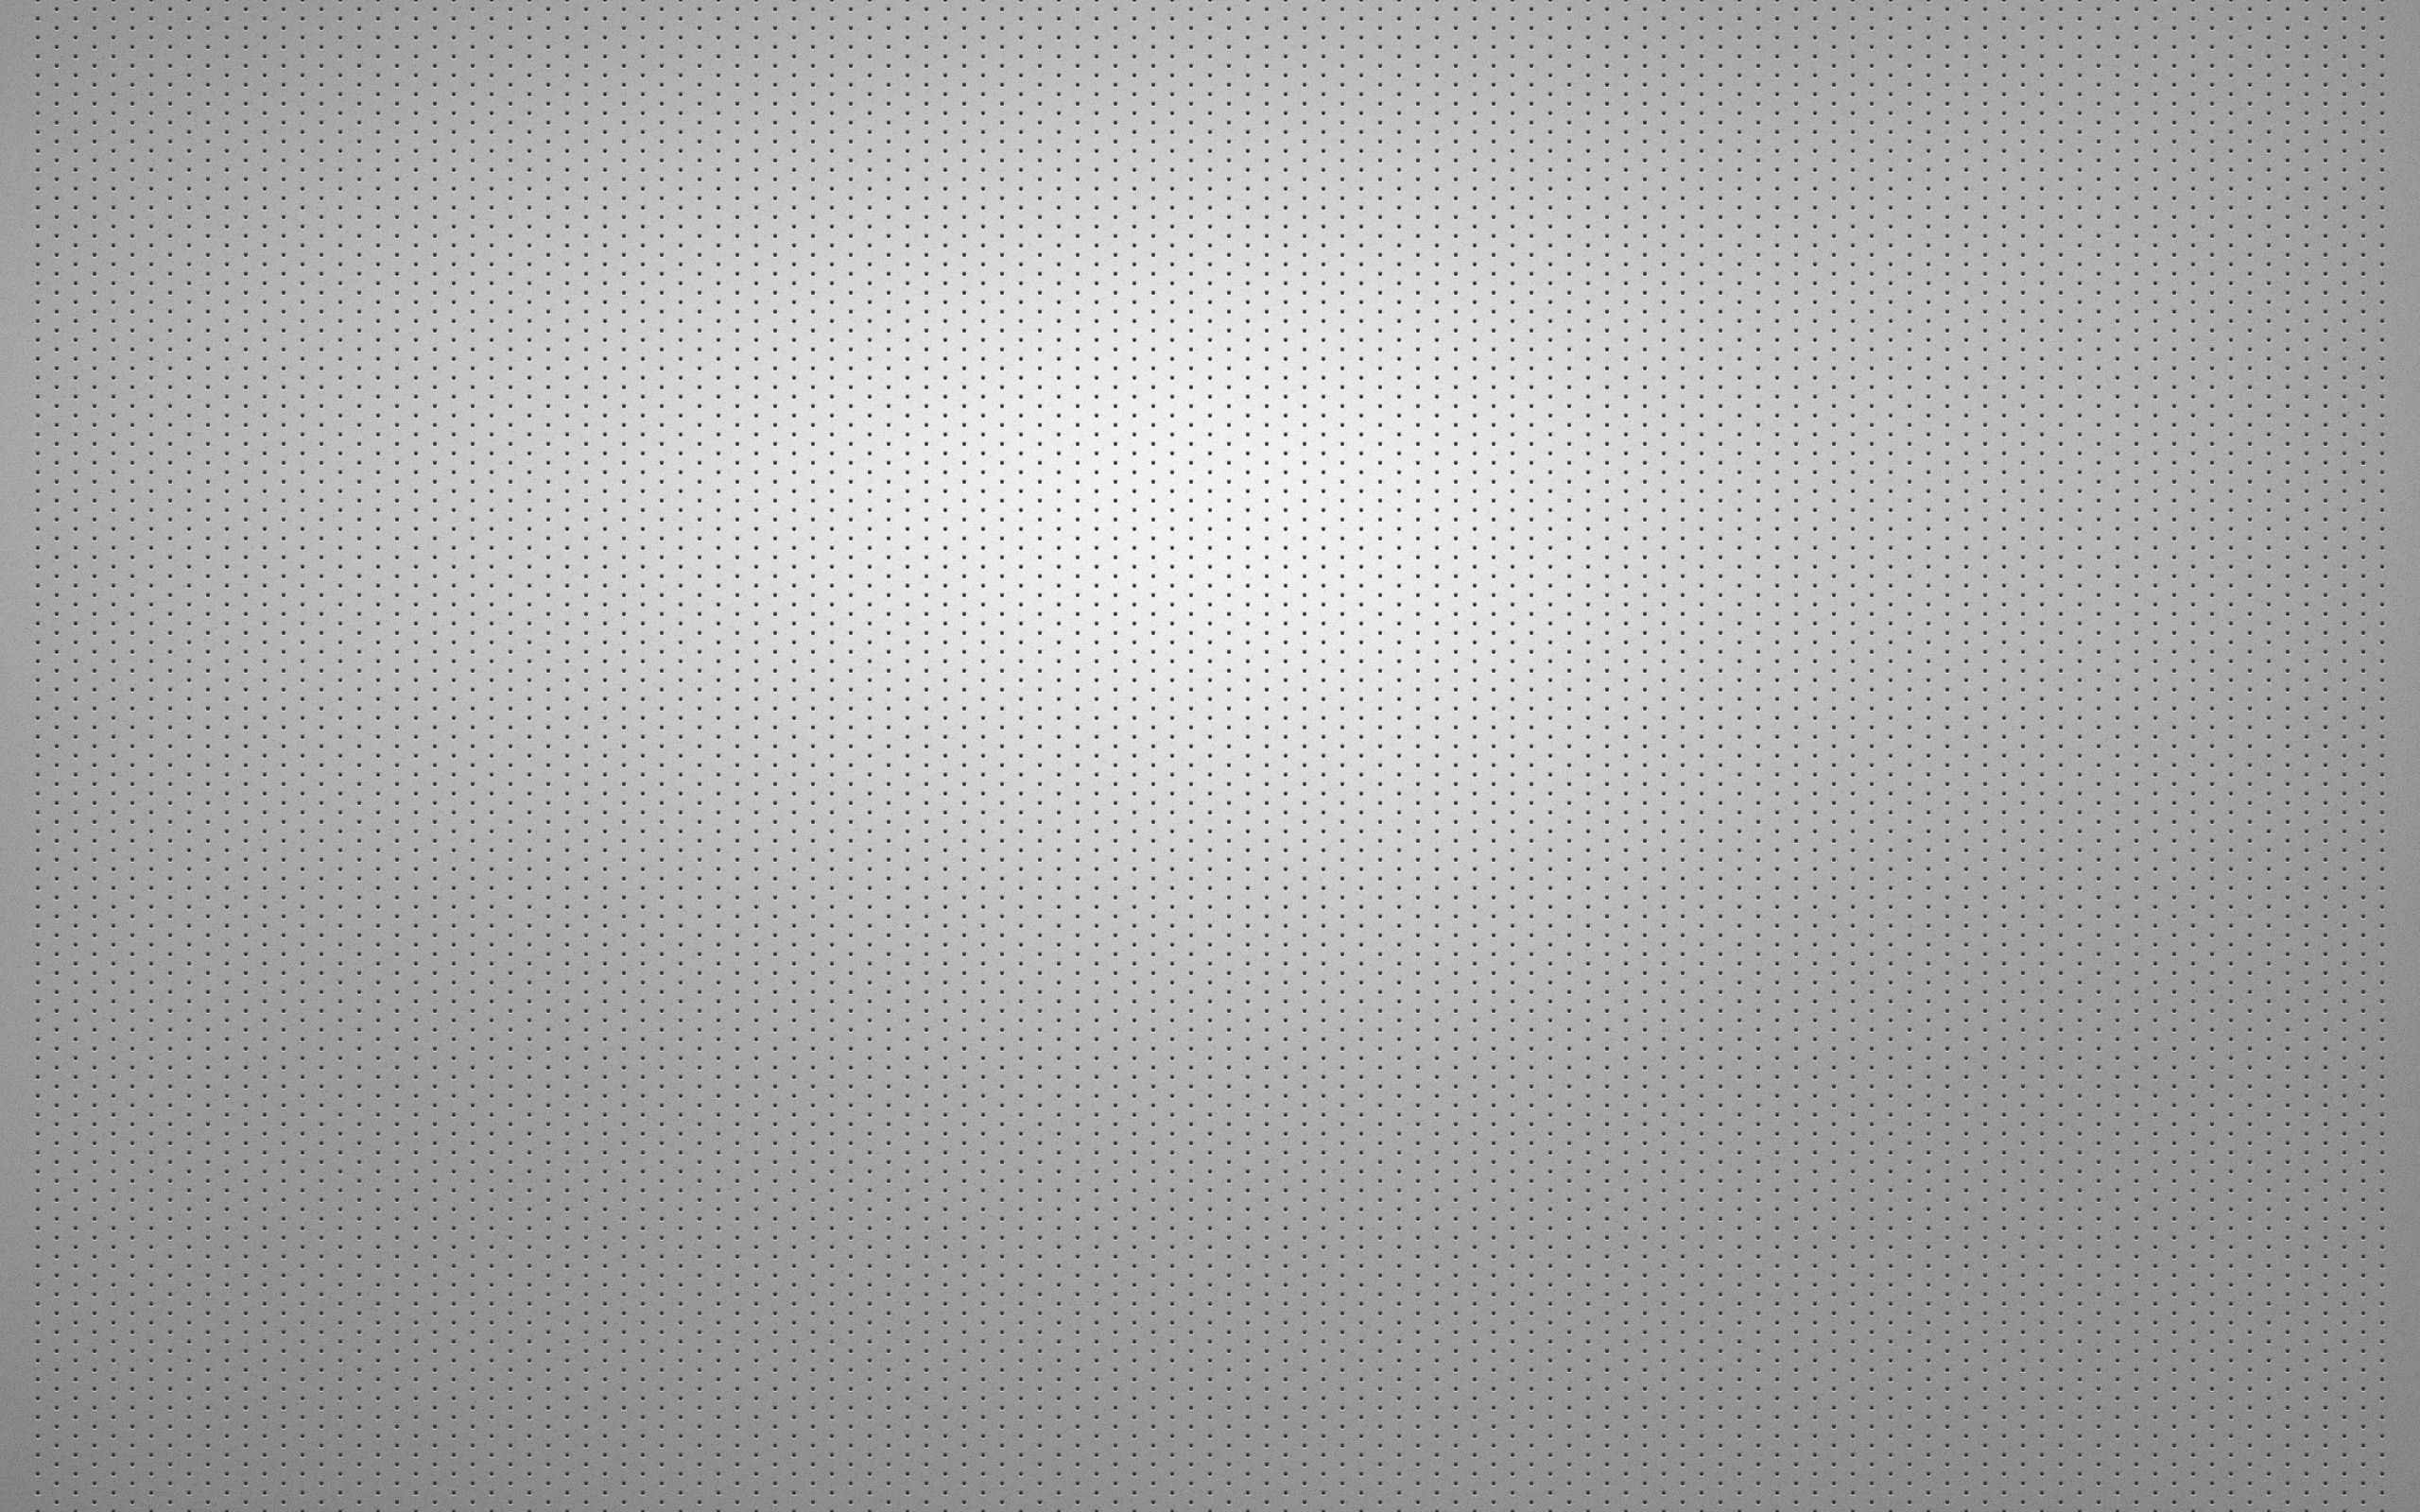 texture, silver, background, grid, points, point, textures